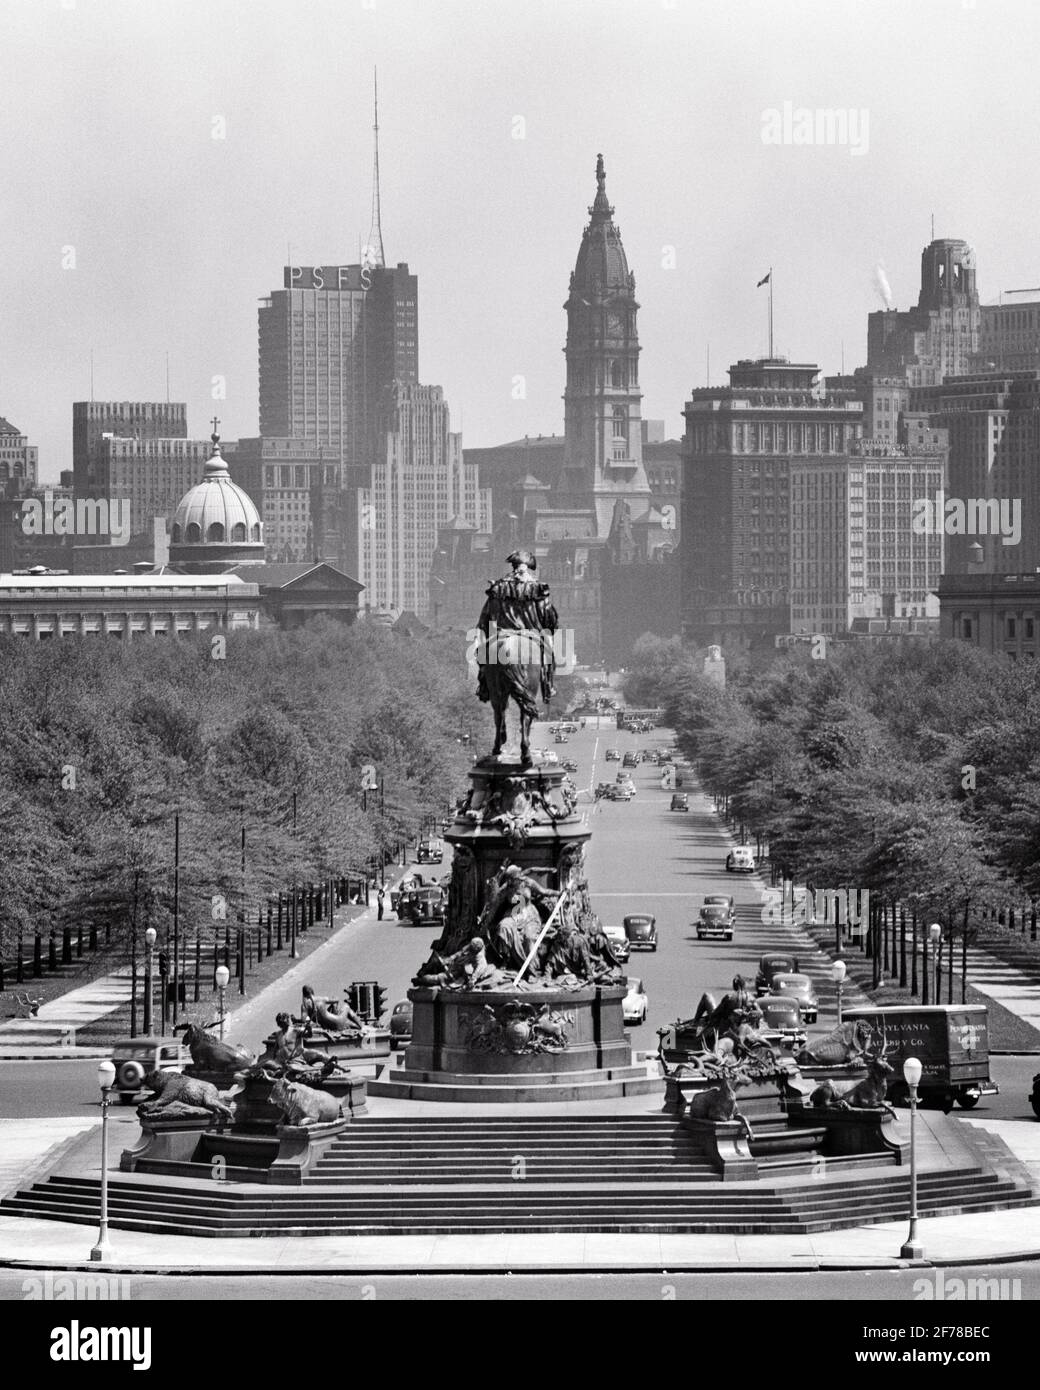 1940s CITY HALL SKYLINE LOOKING DOWN BENJAMIN FRANKLIN PARKWAY PAST EAKINS OVAL FROM ART MUSEUM PHILADELPHIA PENNSYLVANIA USA - p295 HAR001 HARS NORTH AMERICAN BOULEVARD STRUCTURE CITY HALL PROPERTY AUTOS PA OF CATHEDRAL REAL ESTATE COMMONWEALTH DOME CONCEPTUAL STRUCTURES AUTOMOBILES CITIES KEYSTONE STATE VEHICLES EAKINS OVAL EDIFICE GEORGE WASHINGTON PSFS BUILDING SAINTS PETER AND PAUL PARKWAY BASILICA BLACK AND WHITE BROTHERLY LOVE CITY OF BROTHERLY LOVE HAR001 OLD FASHIONED WASHINGTON MONUMENT Stock Photo